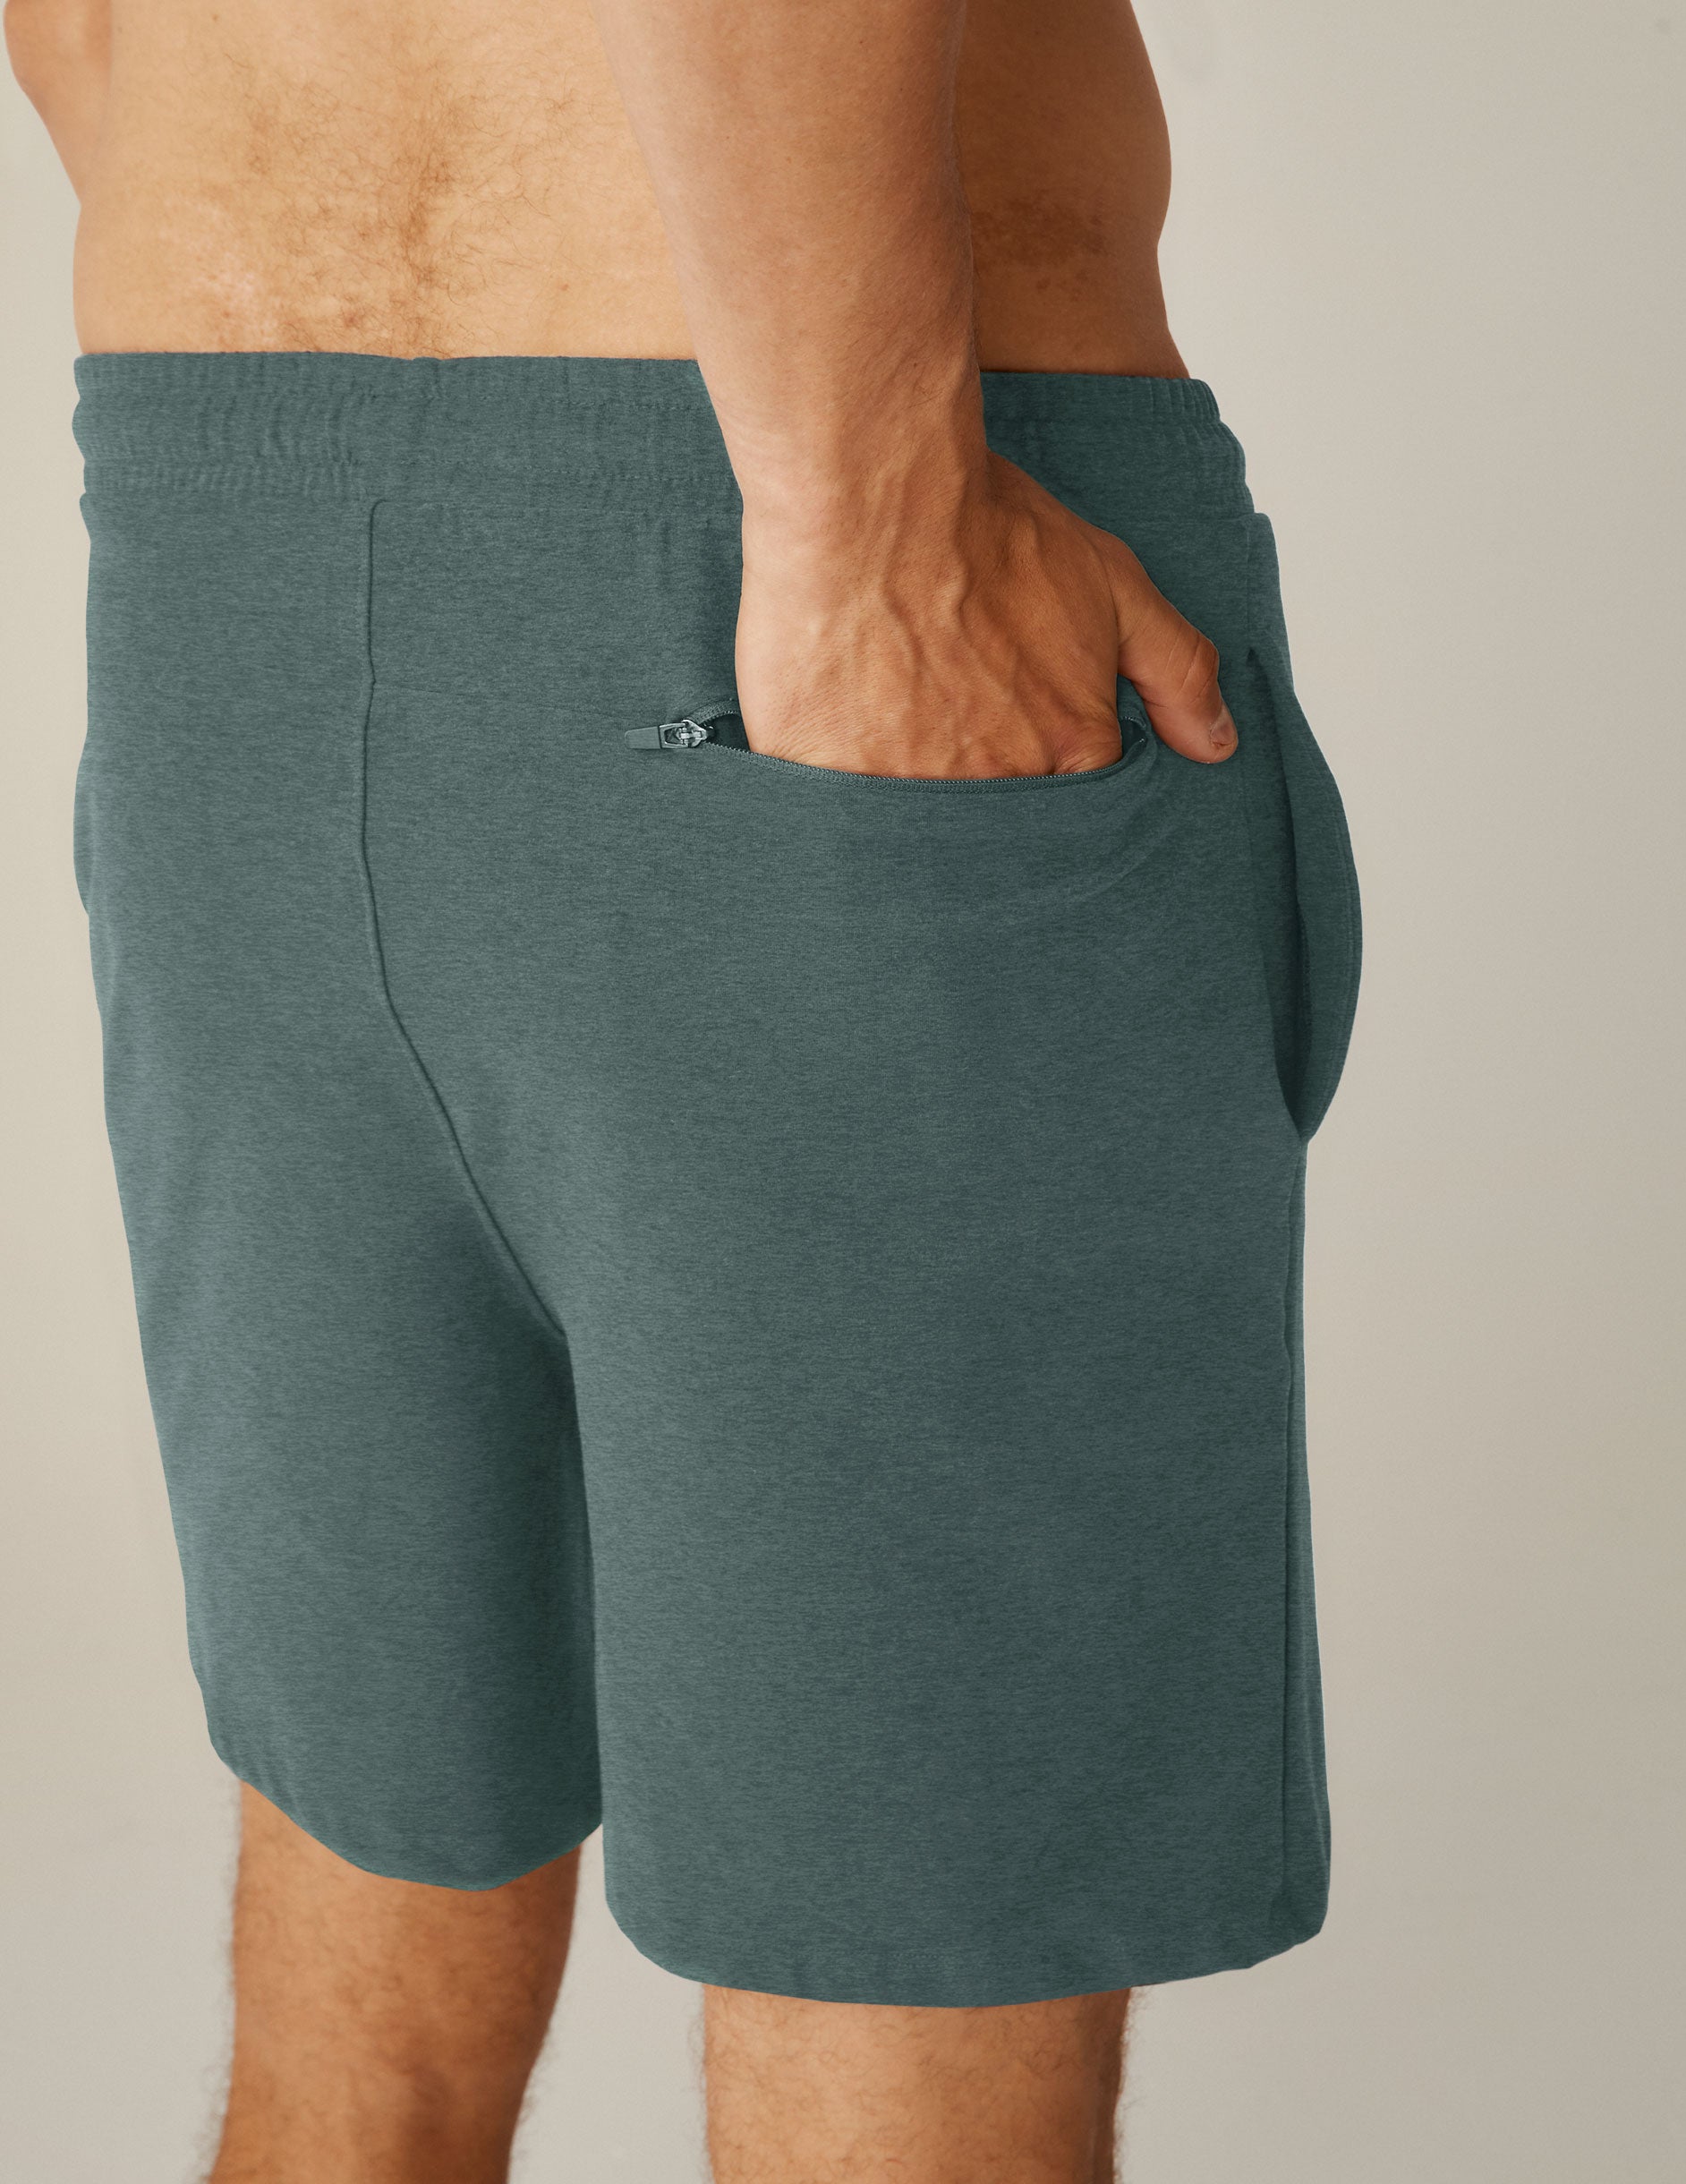 blue men's athleisure shorts with pockets. 